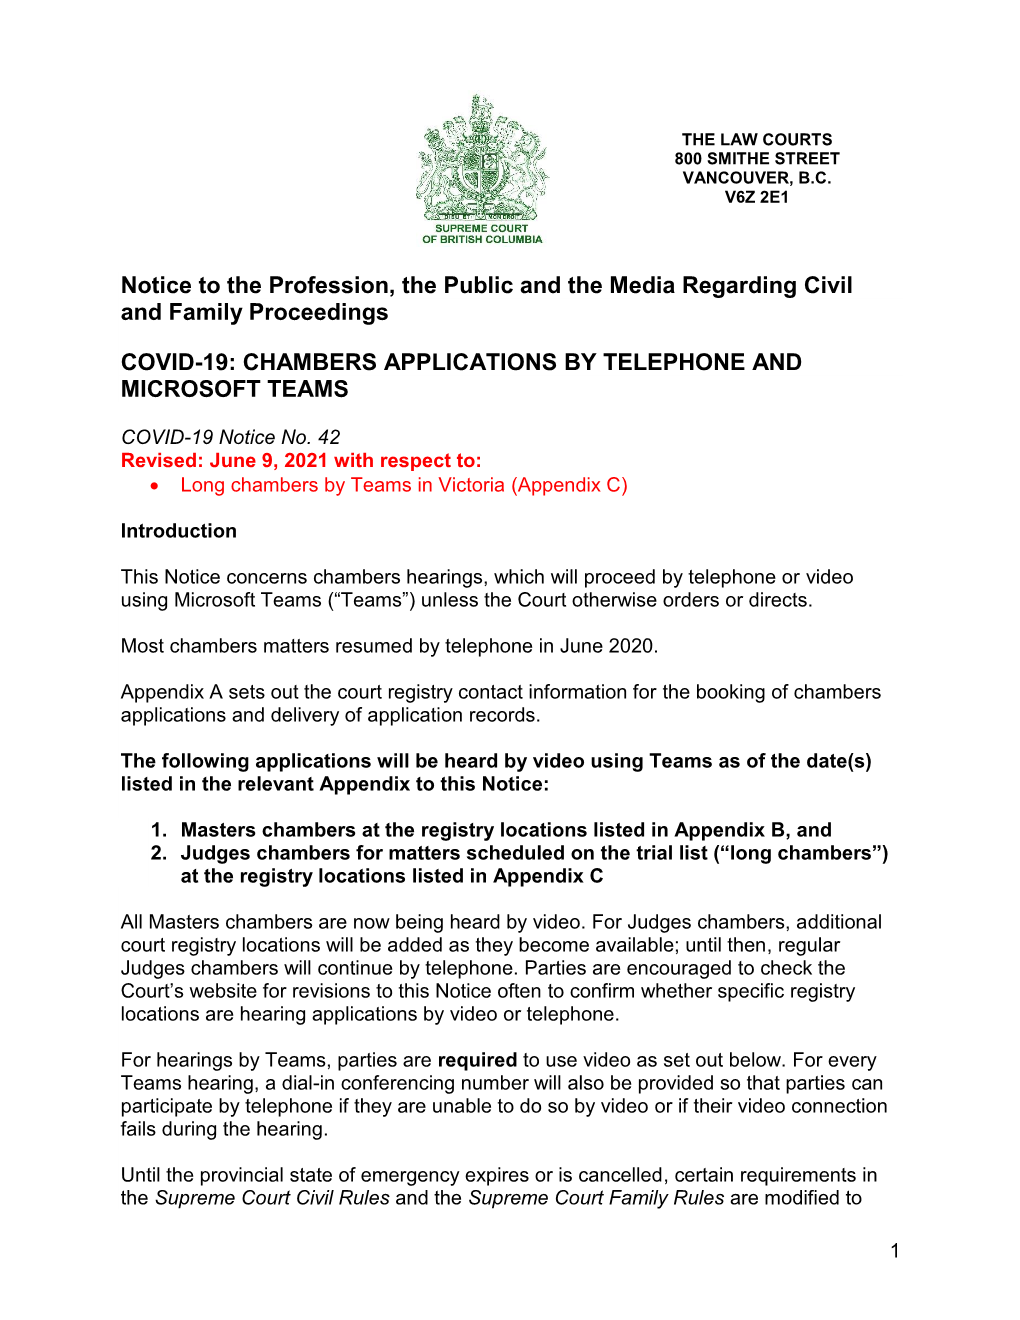 COVID-19 Notice No. 42: Chambers Applications by Telephone